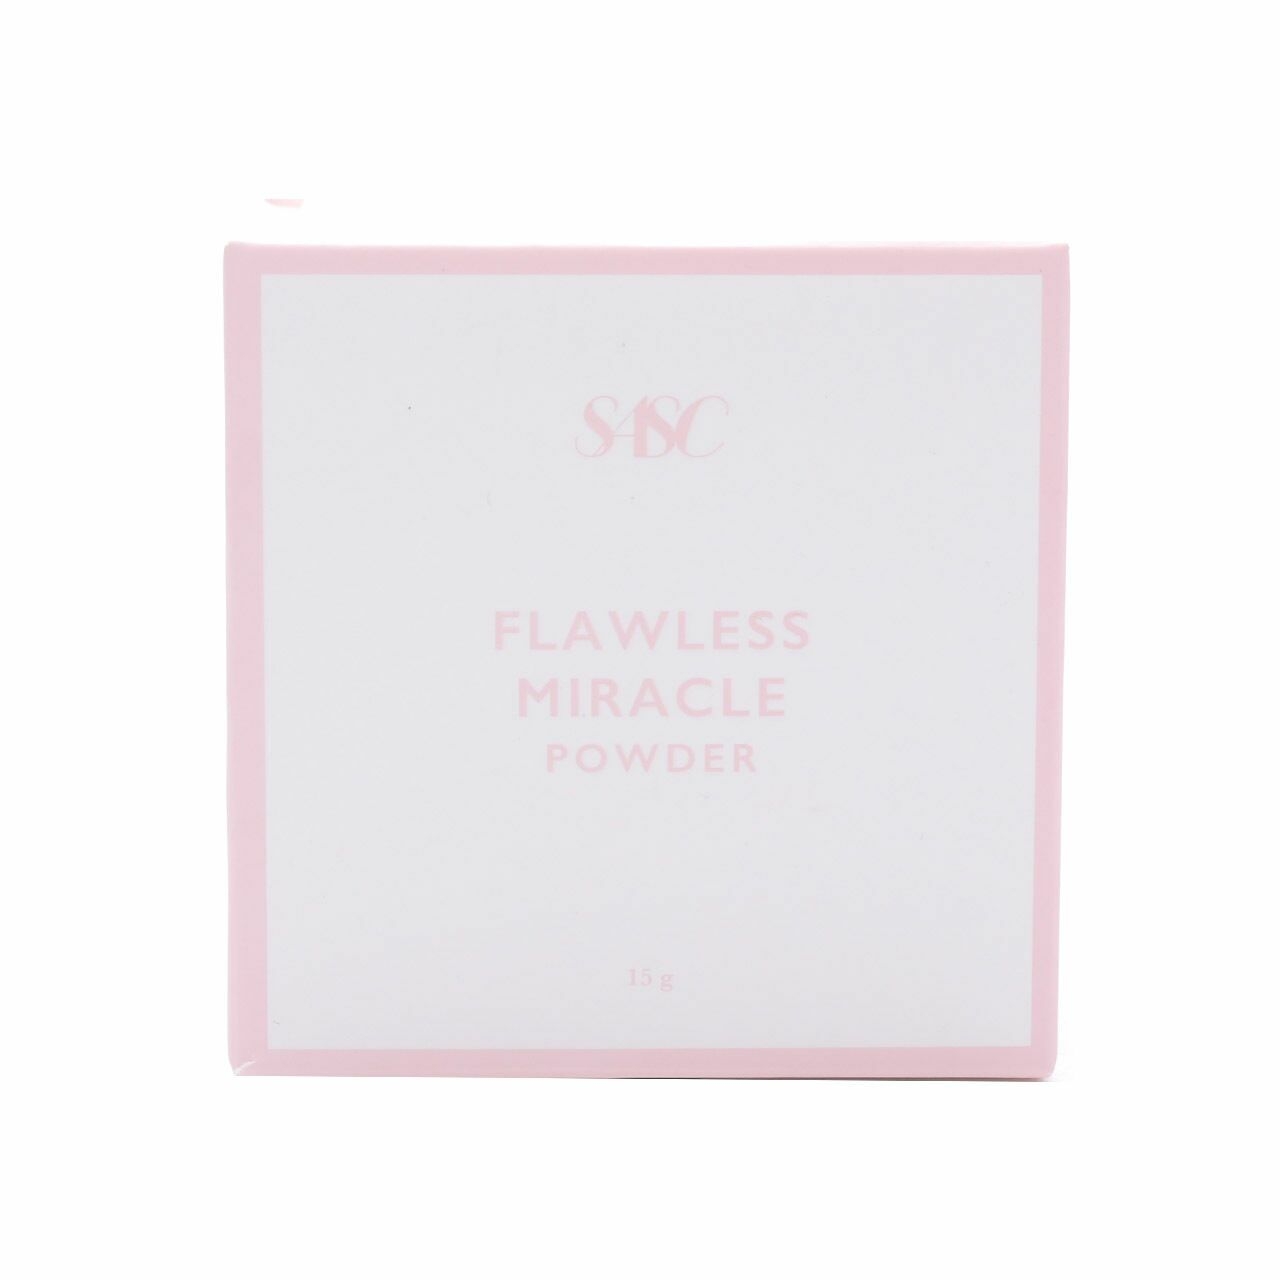 SASC Flawless Miracle Powder #Translucent Faces